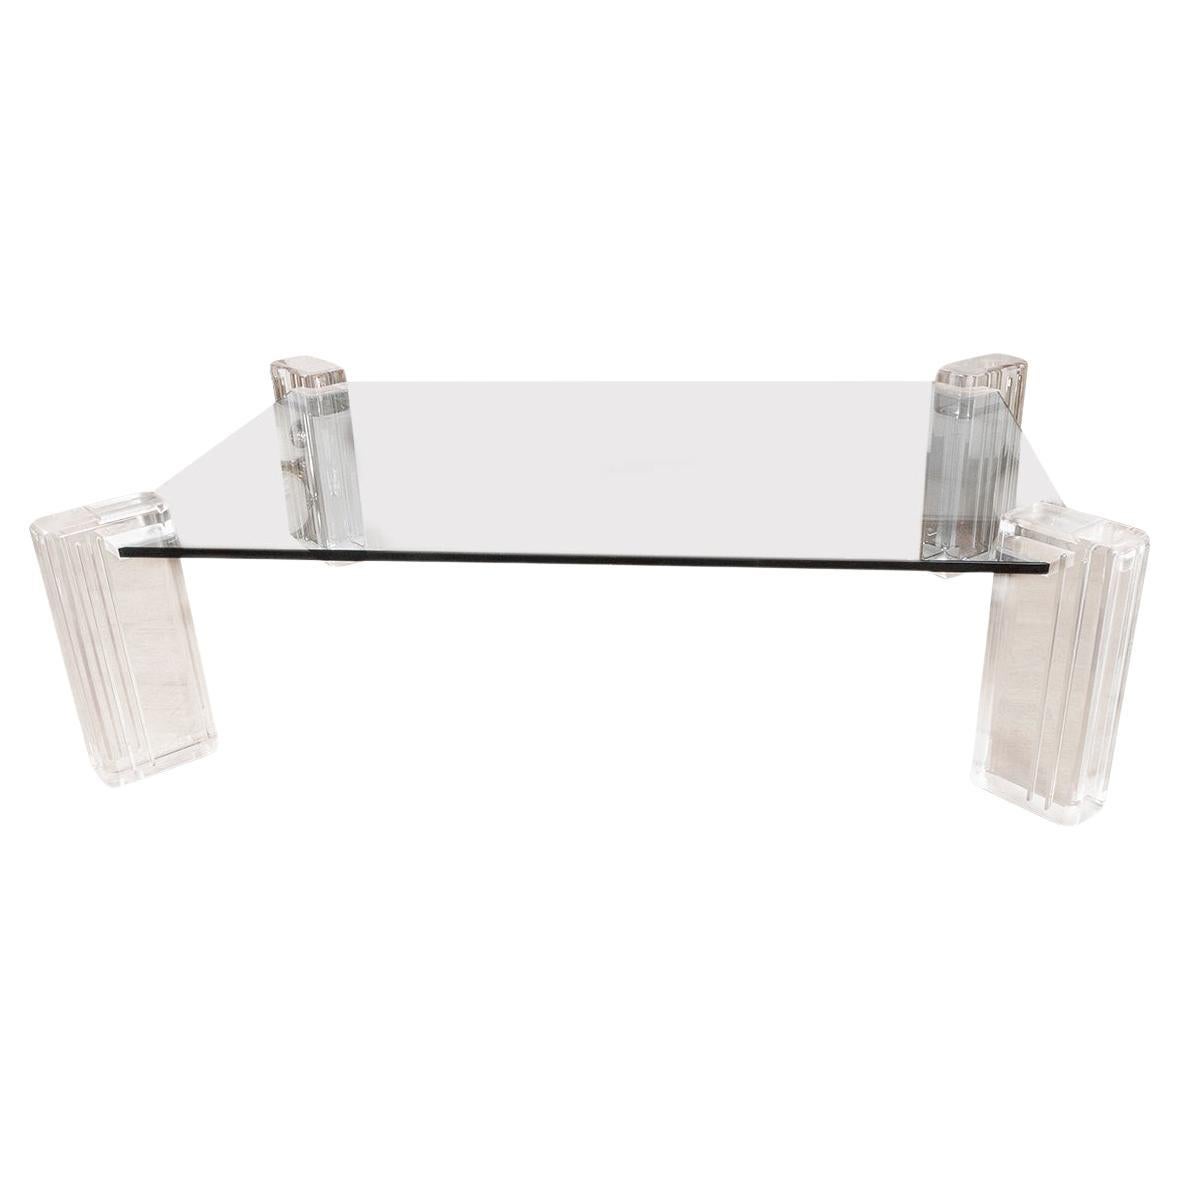 Curved polished nickel side table with cantilevered glass top.  For Sale